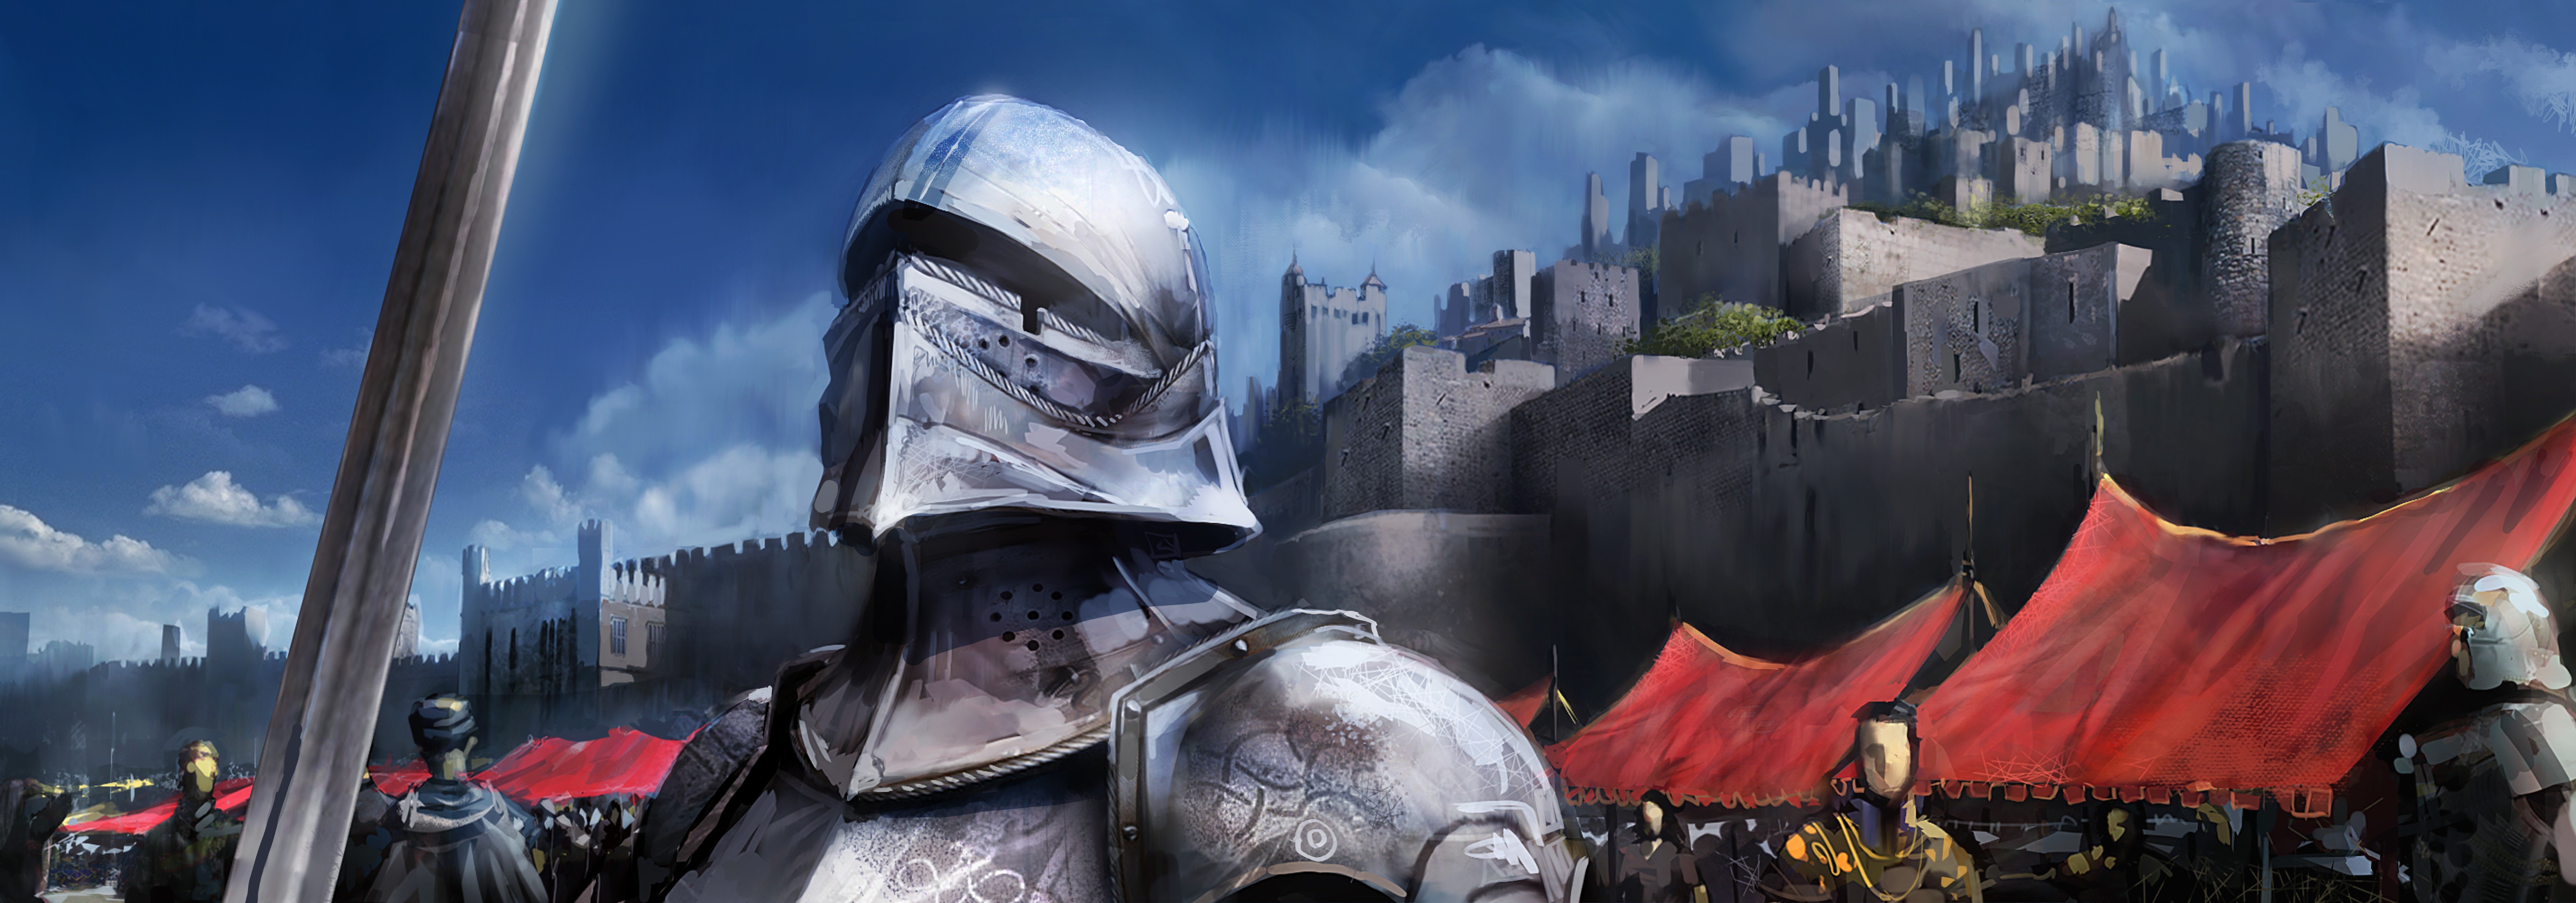 knights, Guards, Armor, Medieval, Silver, Shiny Wallpaper